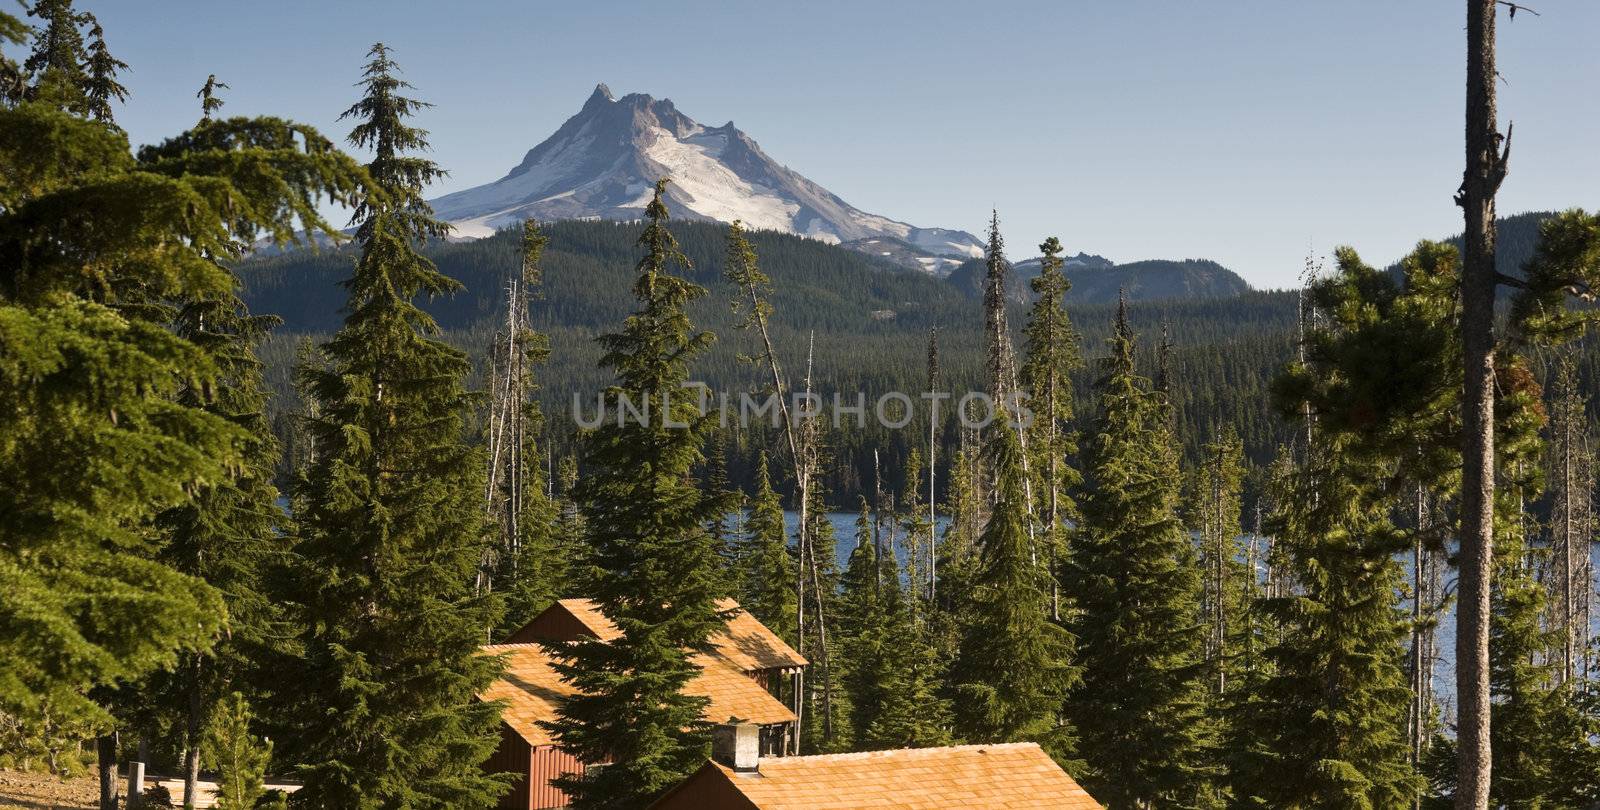 Panoramic View Cabins Around Olallie Lake Near Mount Jefferson by ChrisBoswell